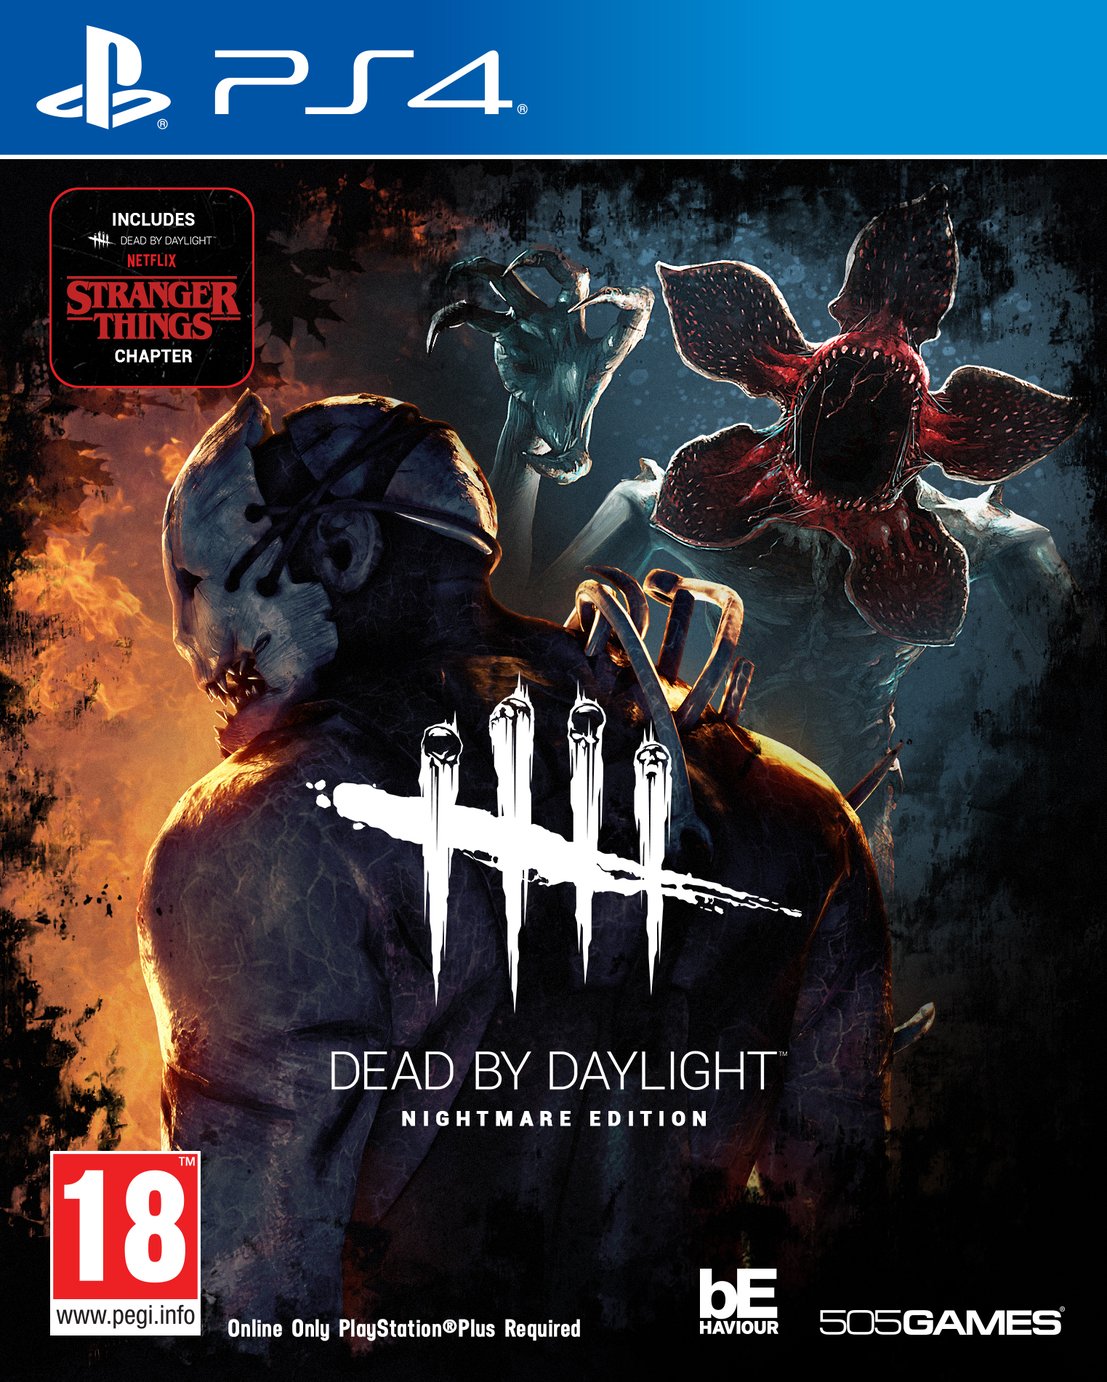 ps4 dead by daylight price